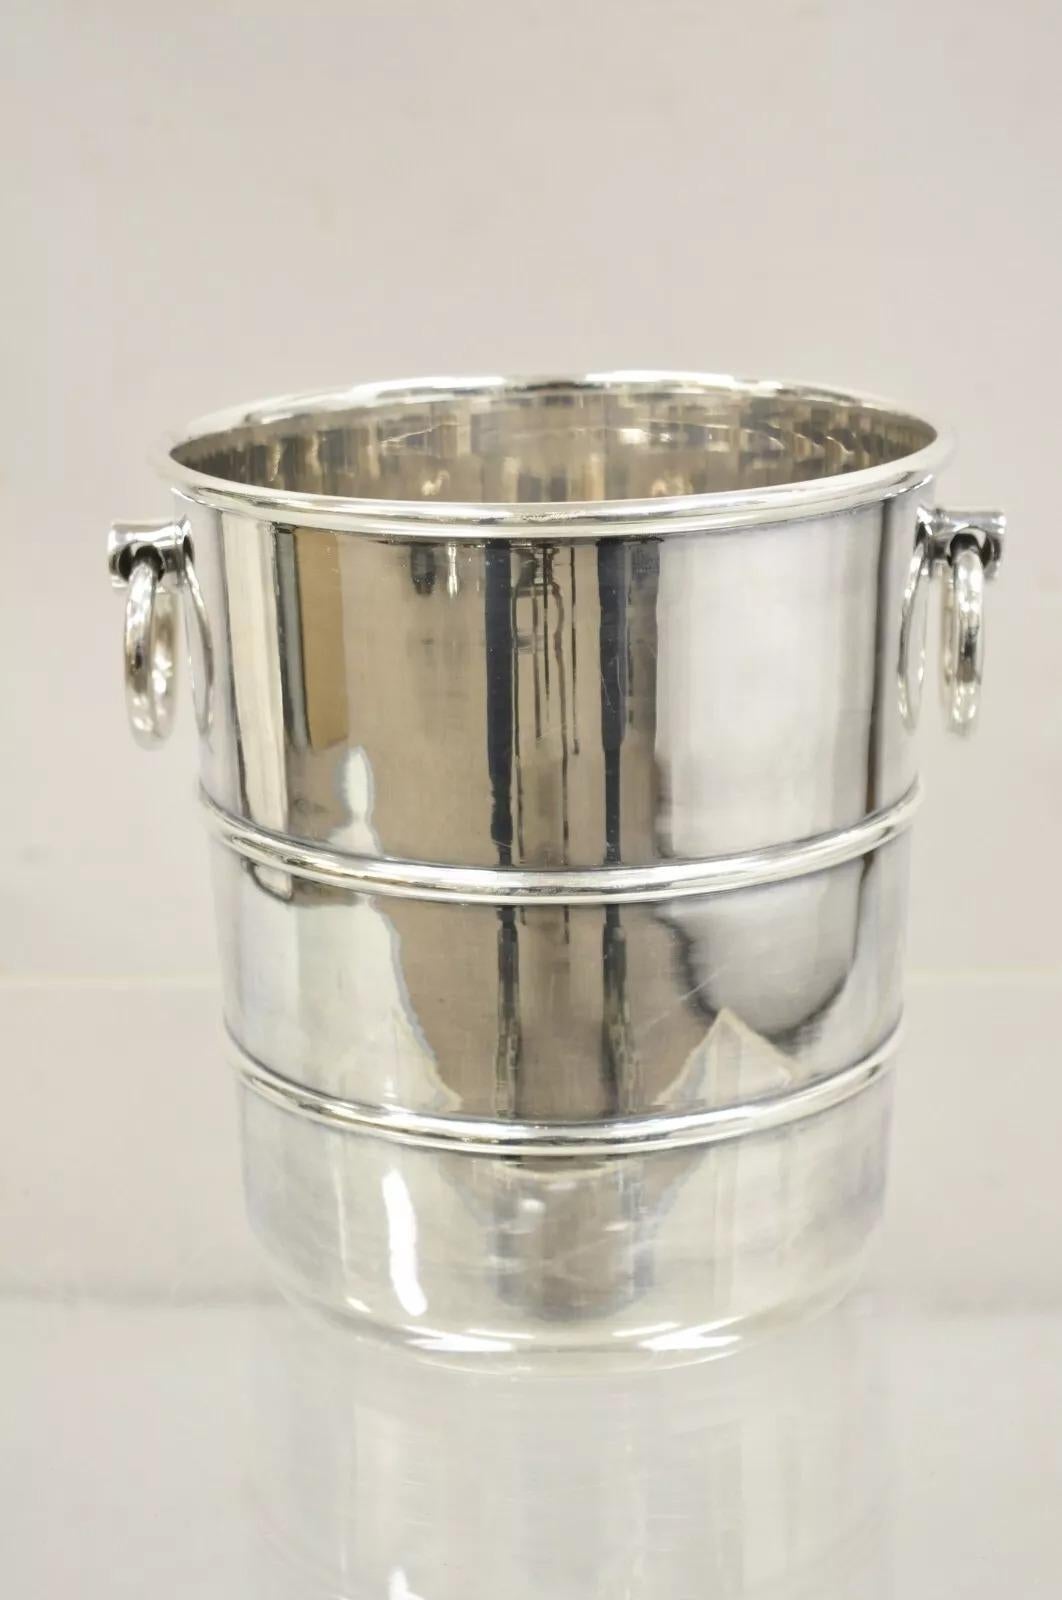 Seau à glace pour champagne Vintage Hollywood Regency Plated Silver Chiller with Drop Ring Handles. Circa Mid 20th Century. Dimensions : 8